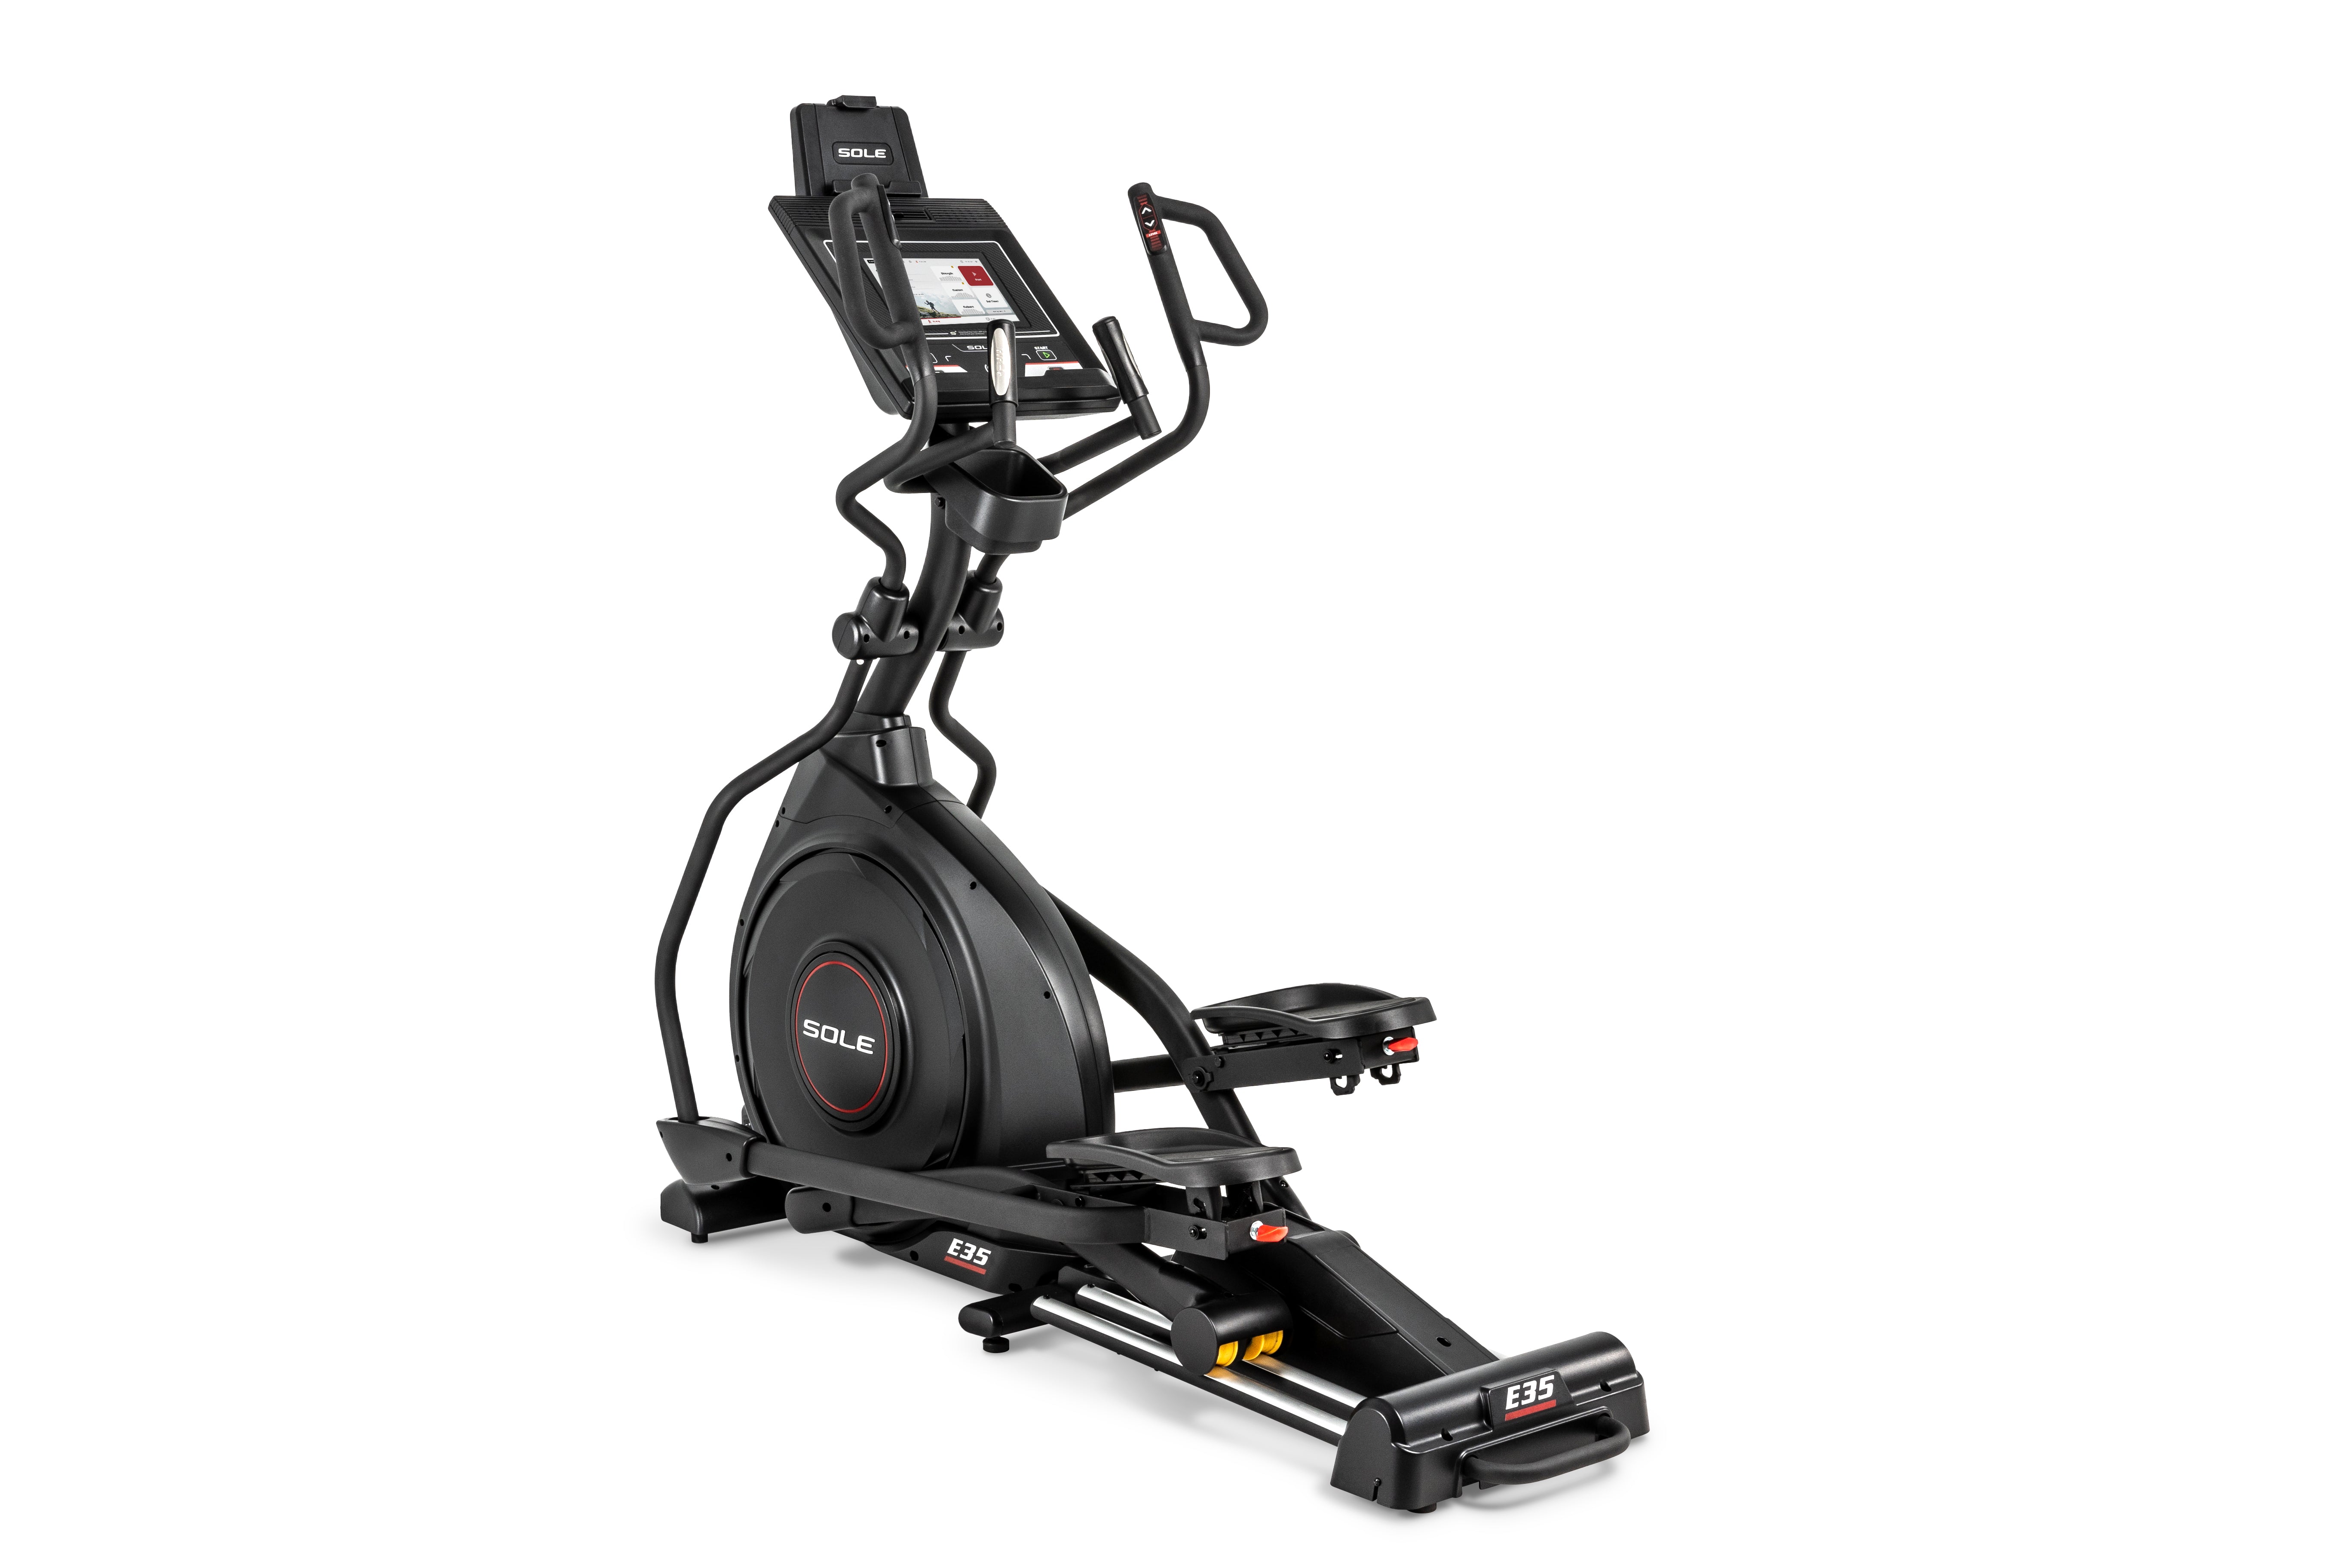 Full view of the Sole E35 elliptical machine featuring a digital touchscreen display, ergonomic handlebars, and a prominent black wheel with the "SOLE" logo. The machine is designed with adjustable foot pedals, labeled "E35", and various adjustment switches for a personalized workout experience.